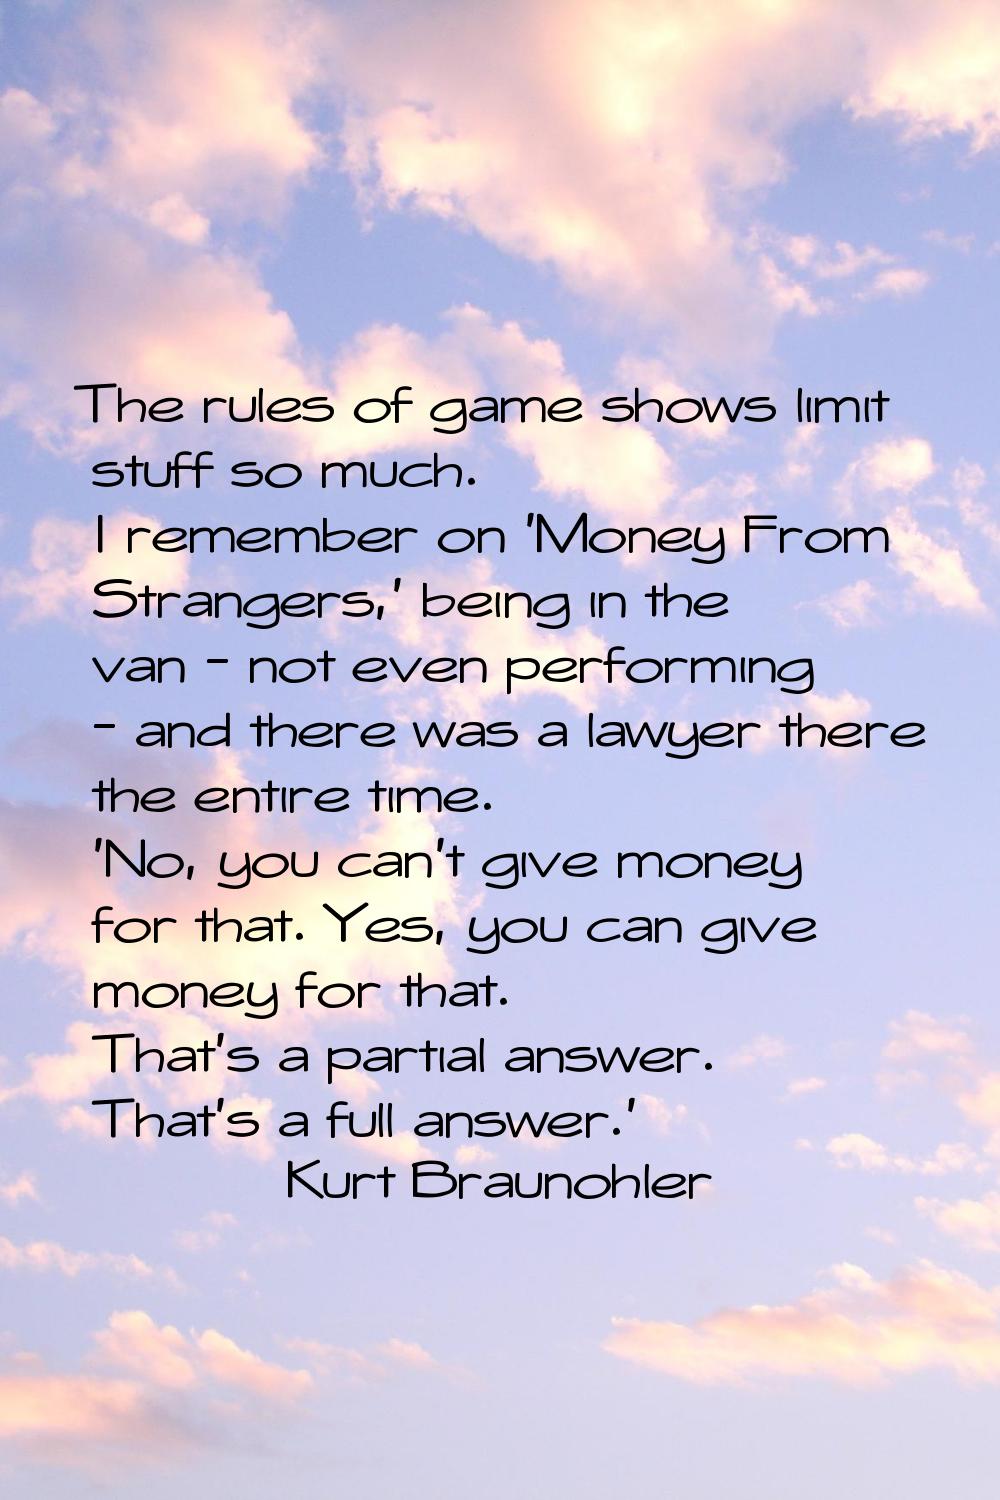 The rules of game shows limit stuff so much. I remember on 'Money From Strangers,' being in the van